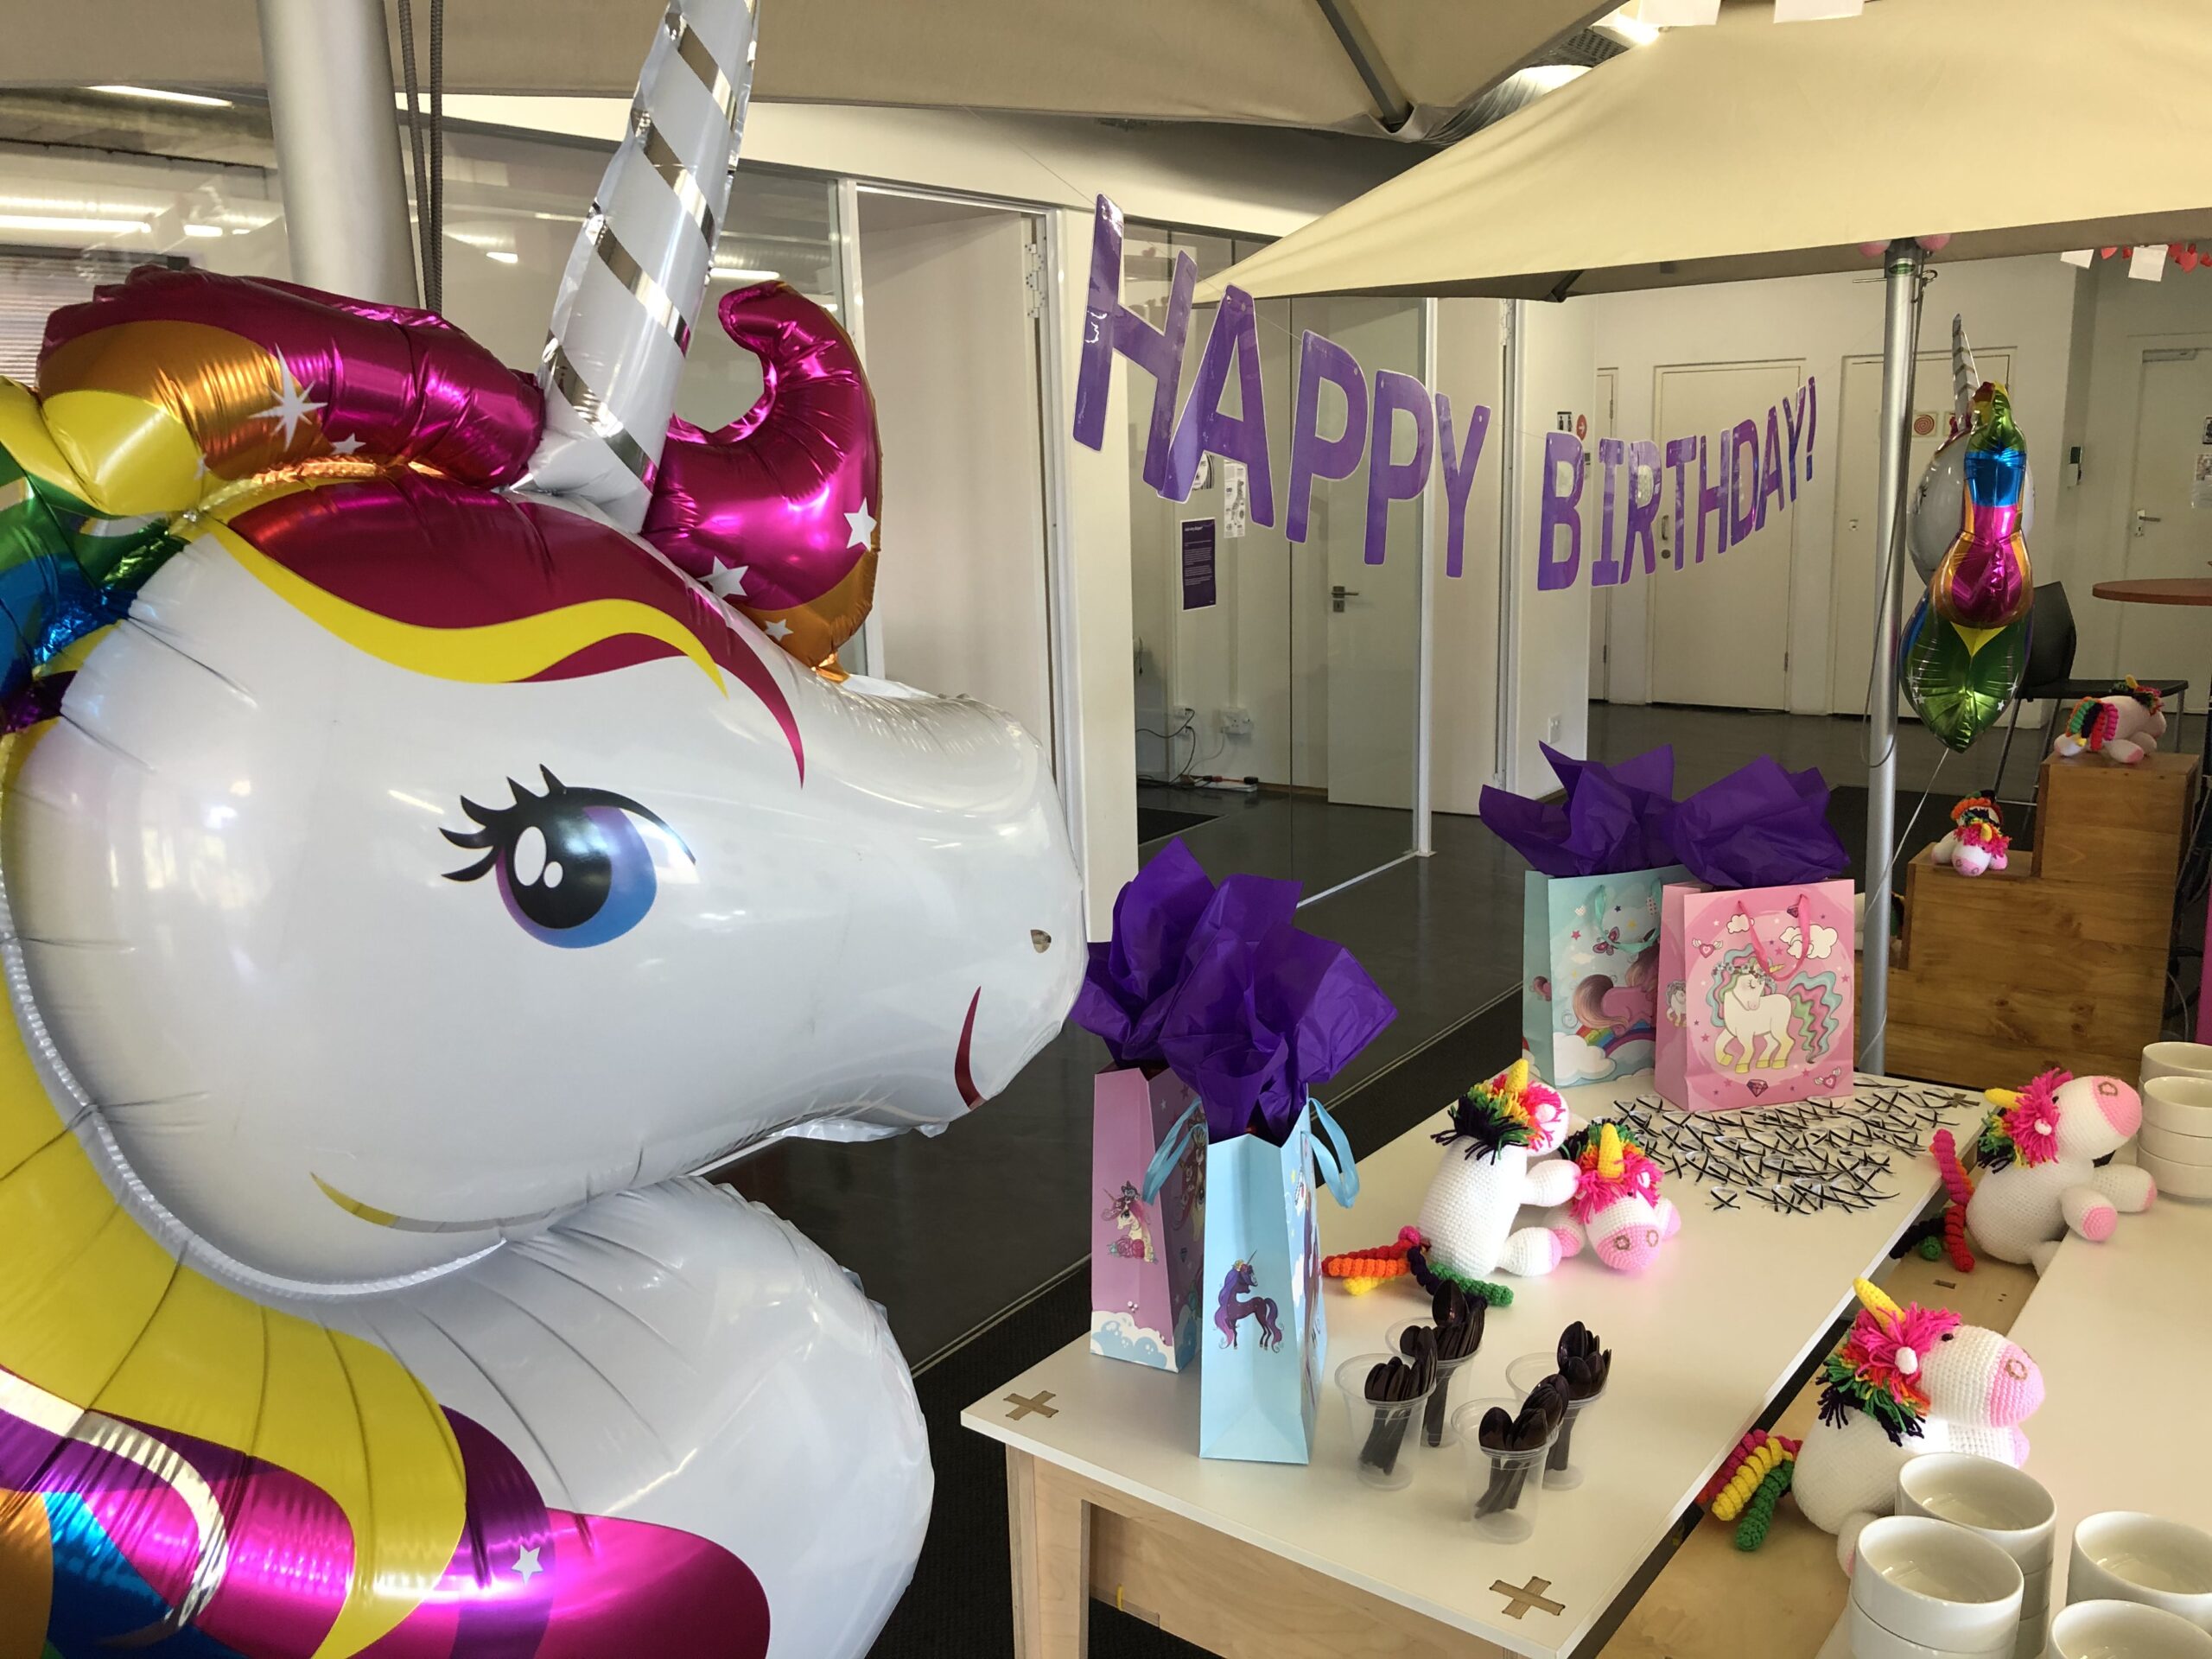 Skyler the unicorn next to a happy birthday sign and a table with goodies